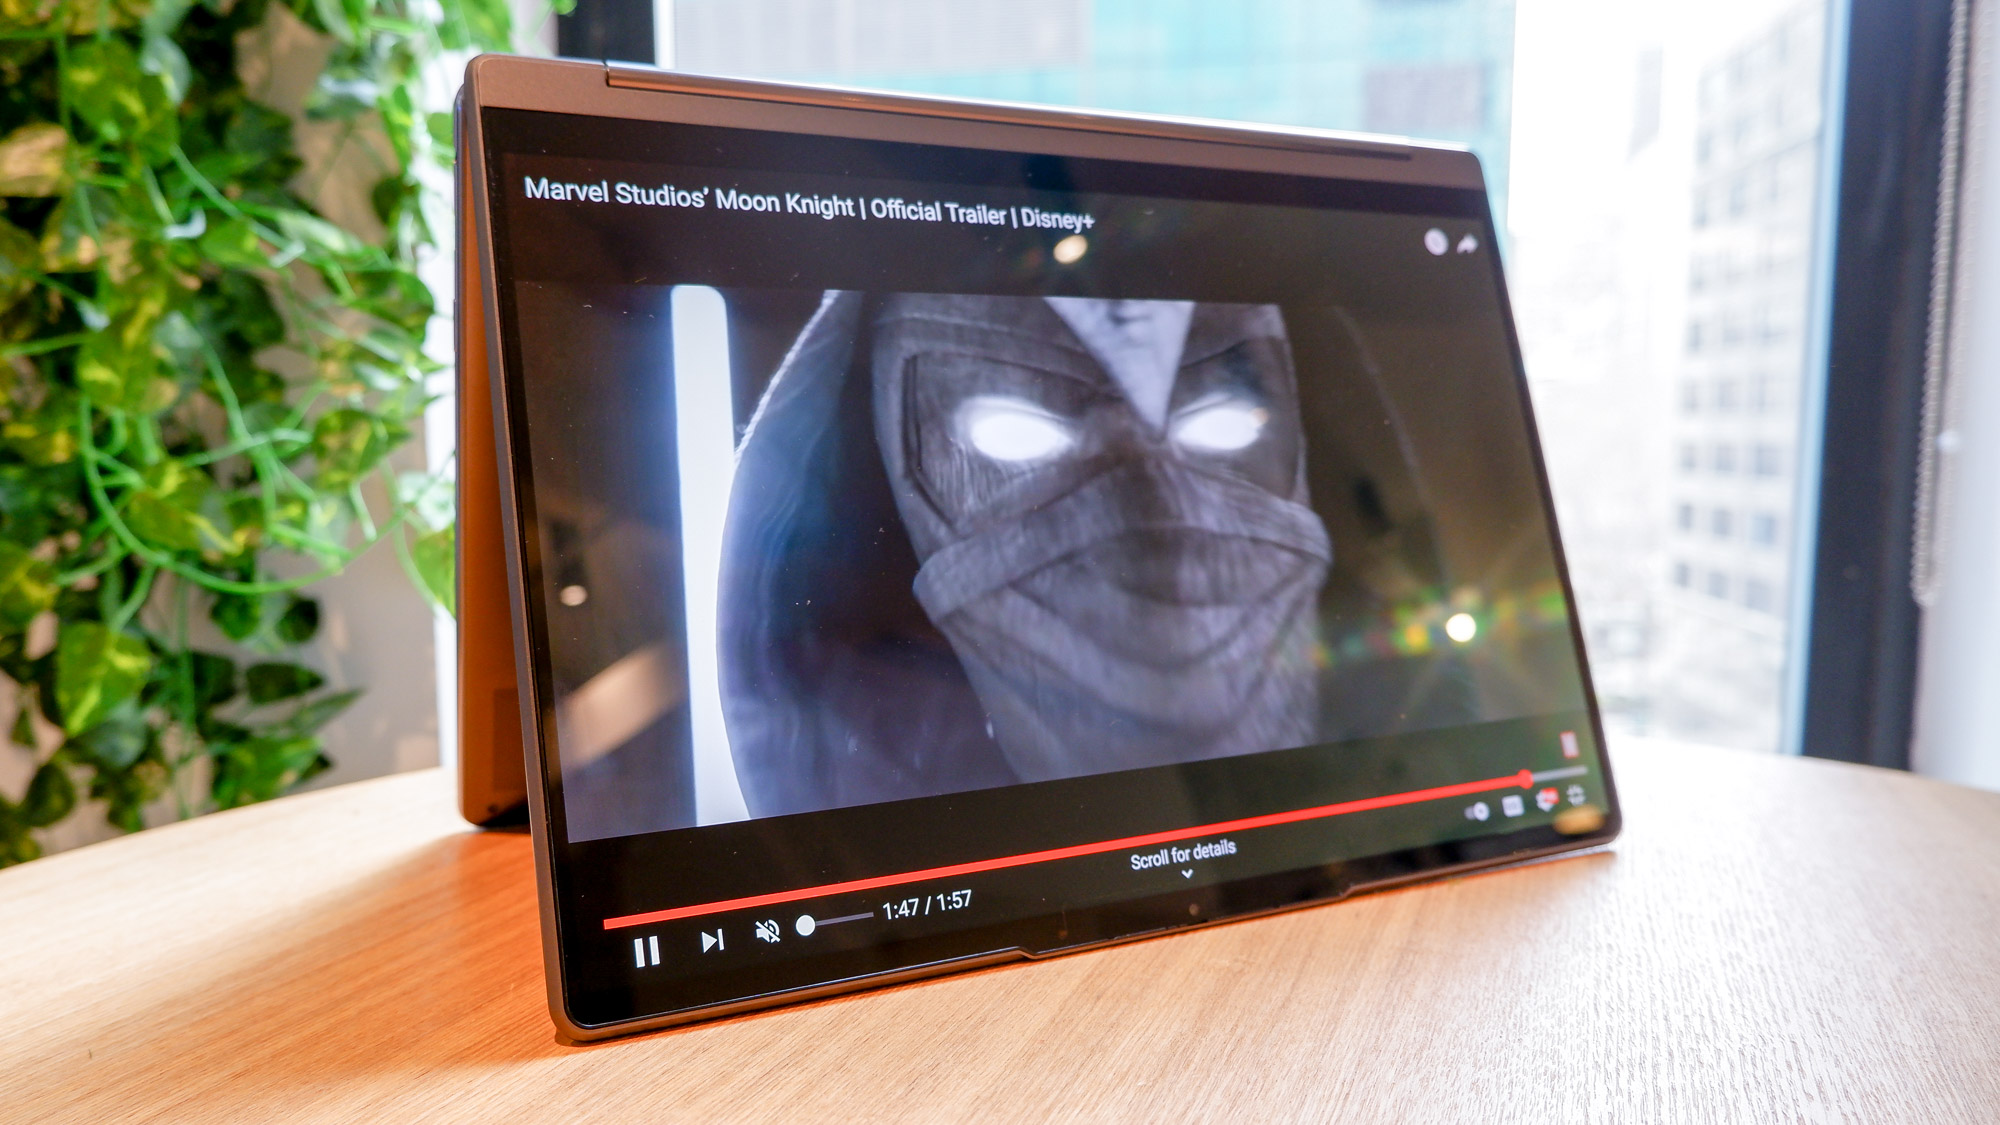 Movies, TV shows and streaming content look brilliant on the Yoga 9i Gen 7